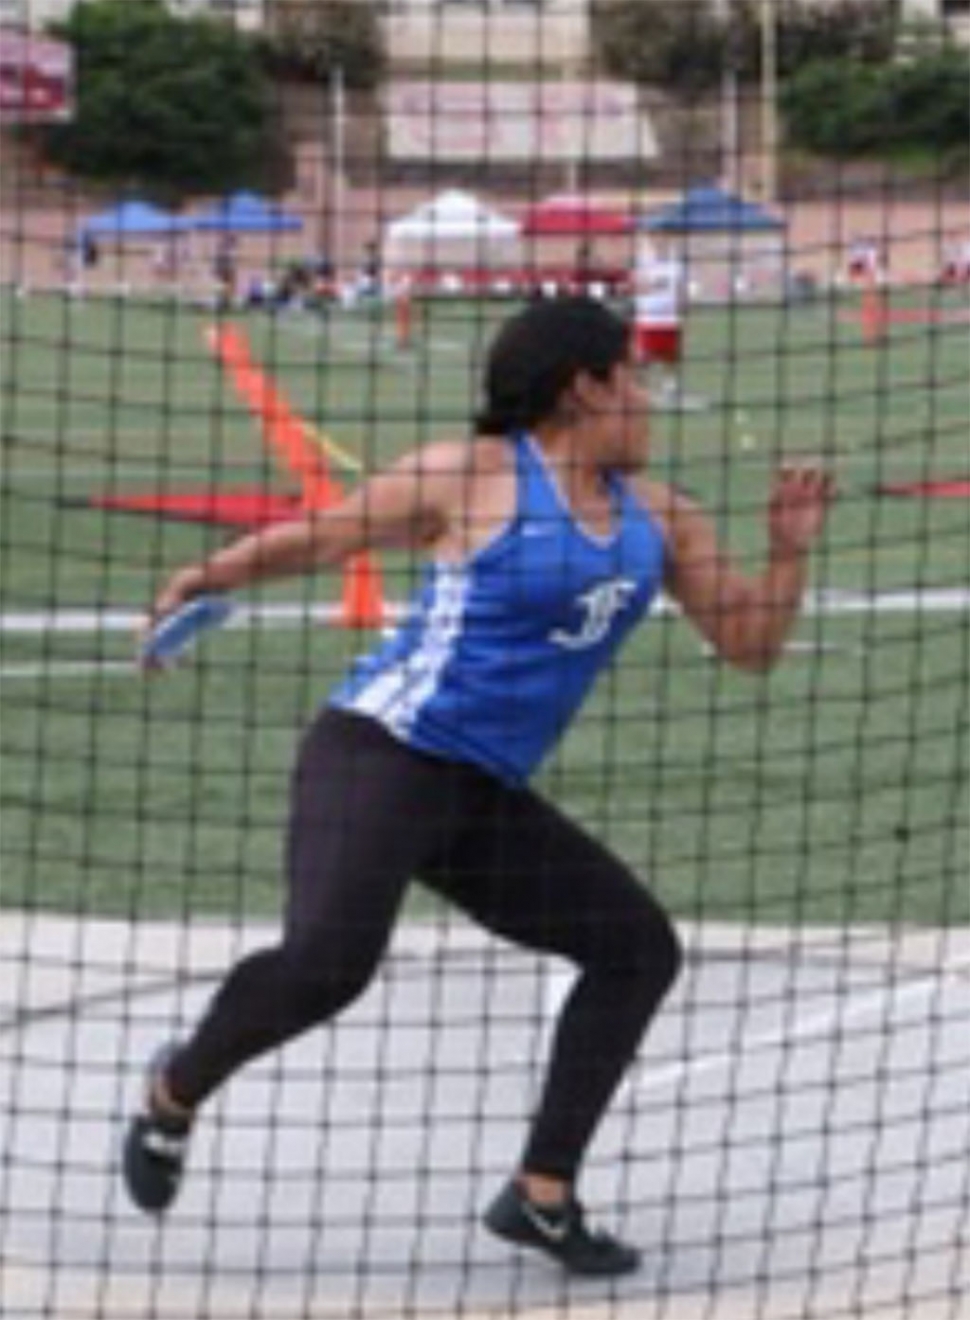 Fillmore High senior Cynthia Hurtado advances to the CIF SS Division 4 Finals at El Camino College in the Discus this weekend. Cynthia is a three time CIF SS Division Prelims qualifier and this year a first time CIF SS Division finalist. We want to wish Cynthia the best. Throw far!